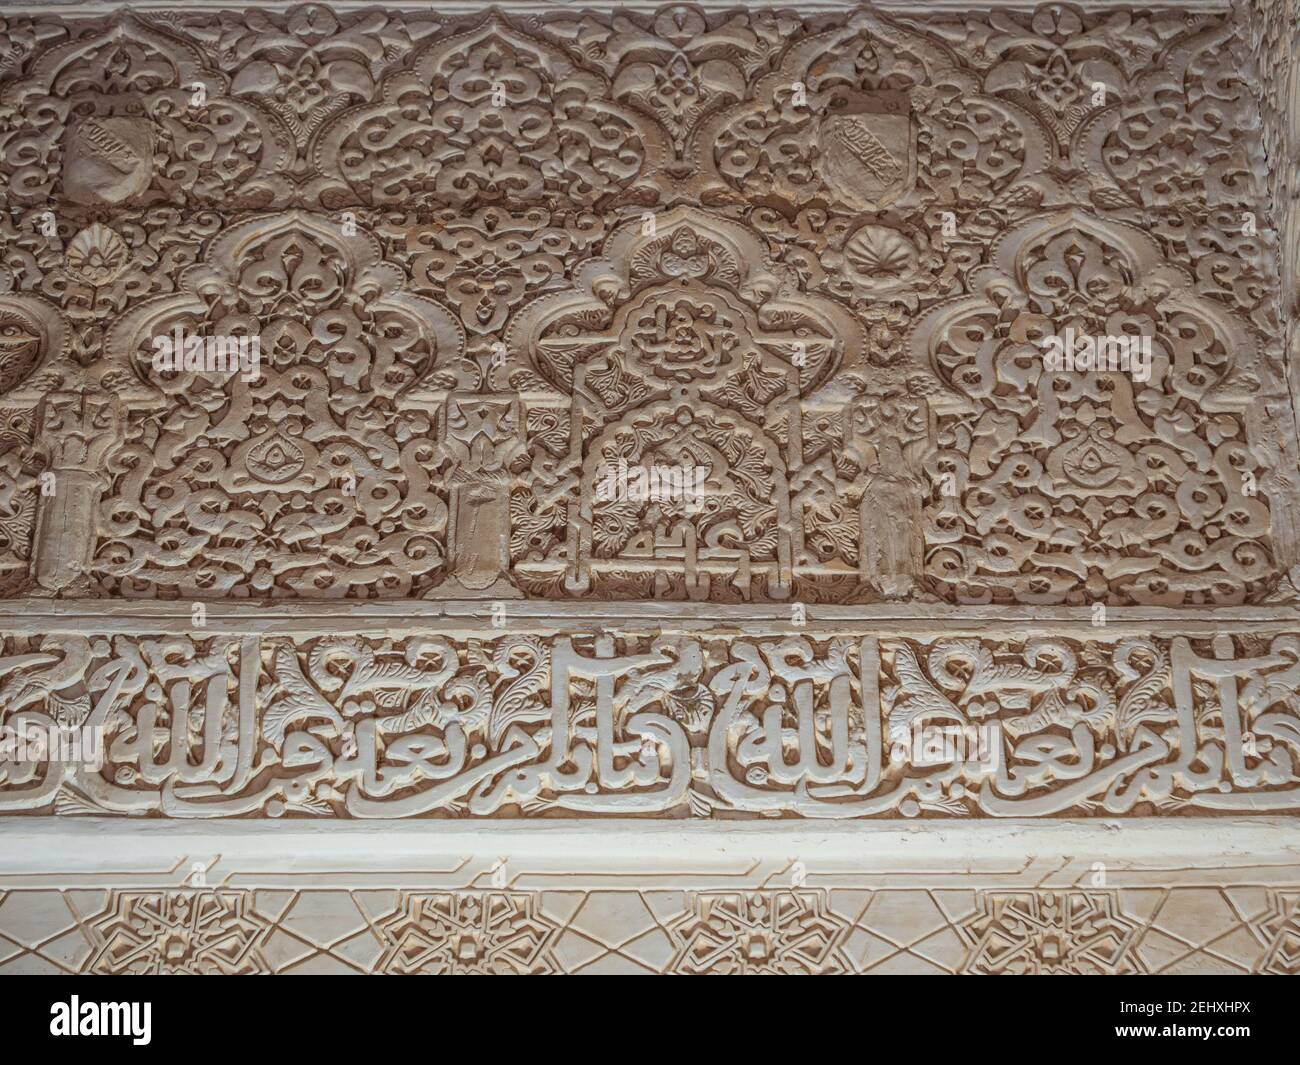 Relief wall carving at The Alhambra Granada Spain Stock Photo